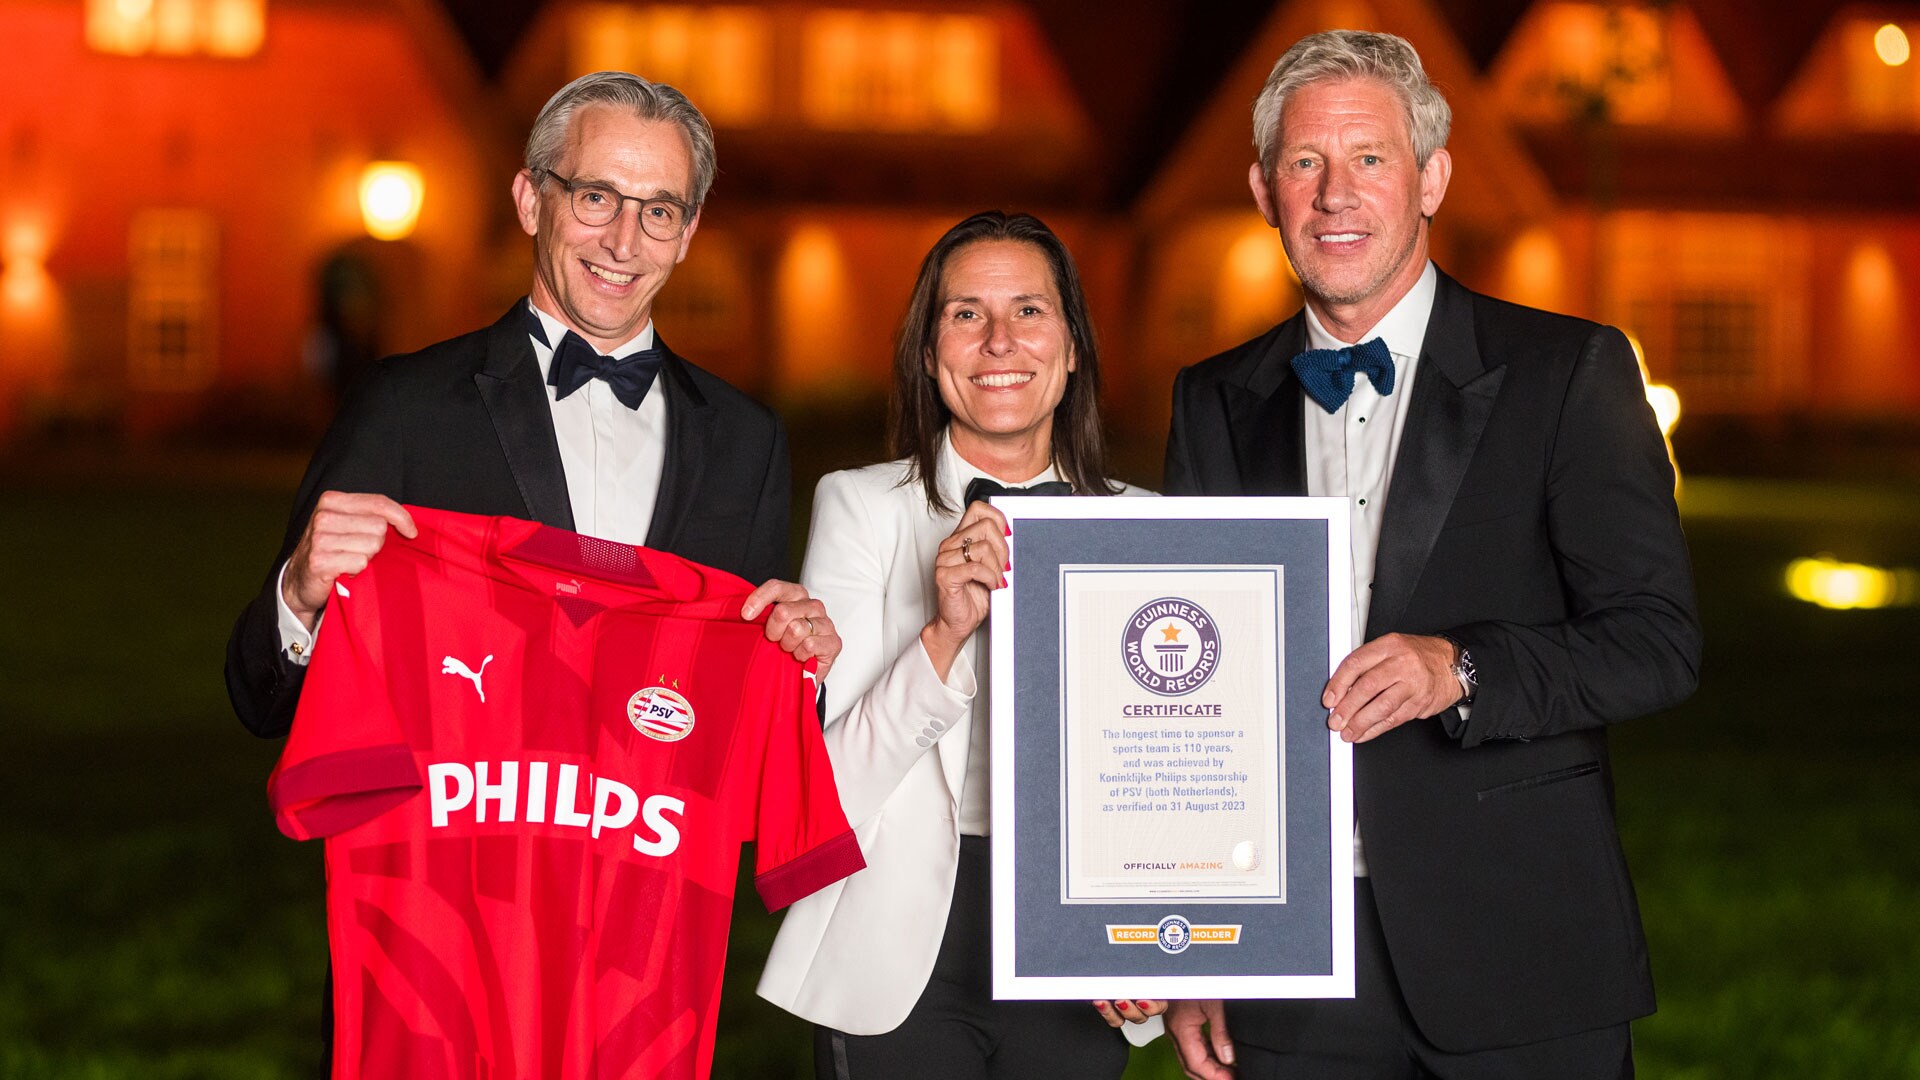 World record set by Philips and football club PSV